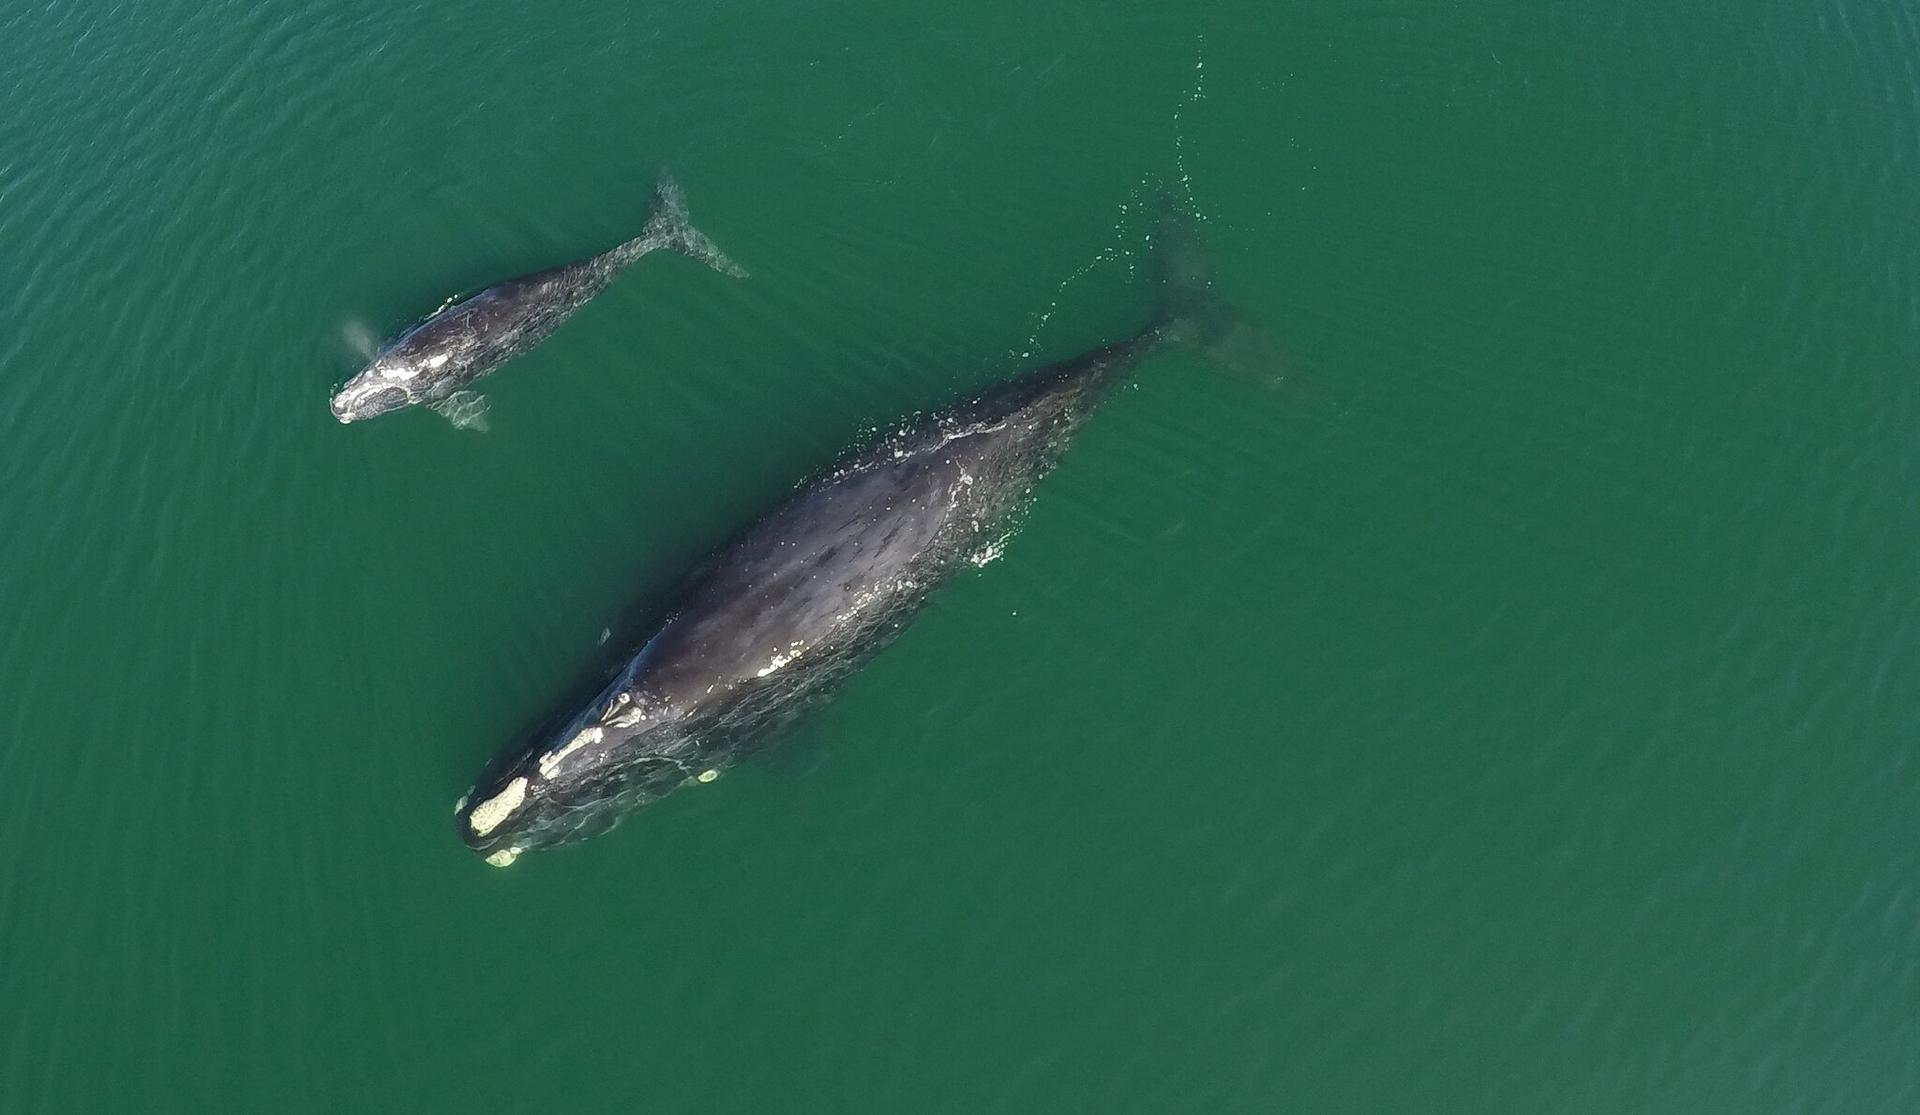 North Atlantic right whale with calf in blue-green waters